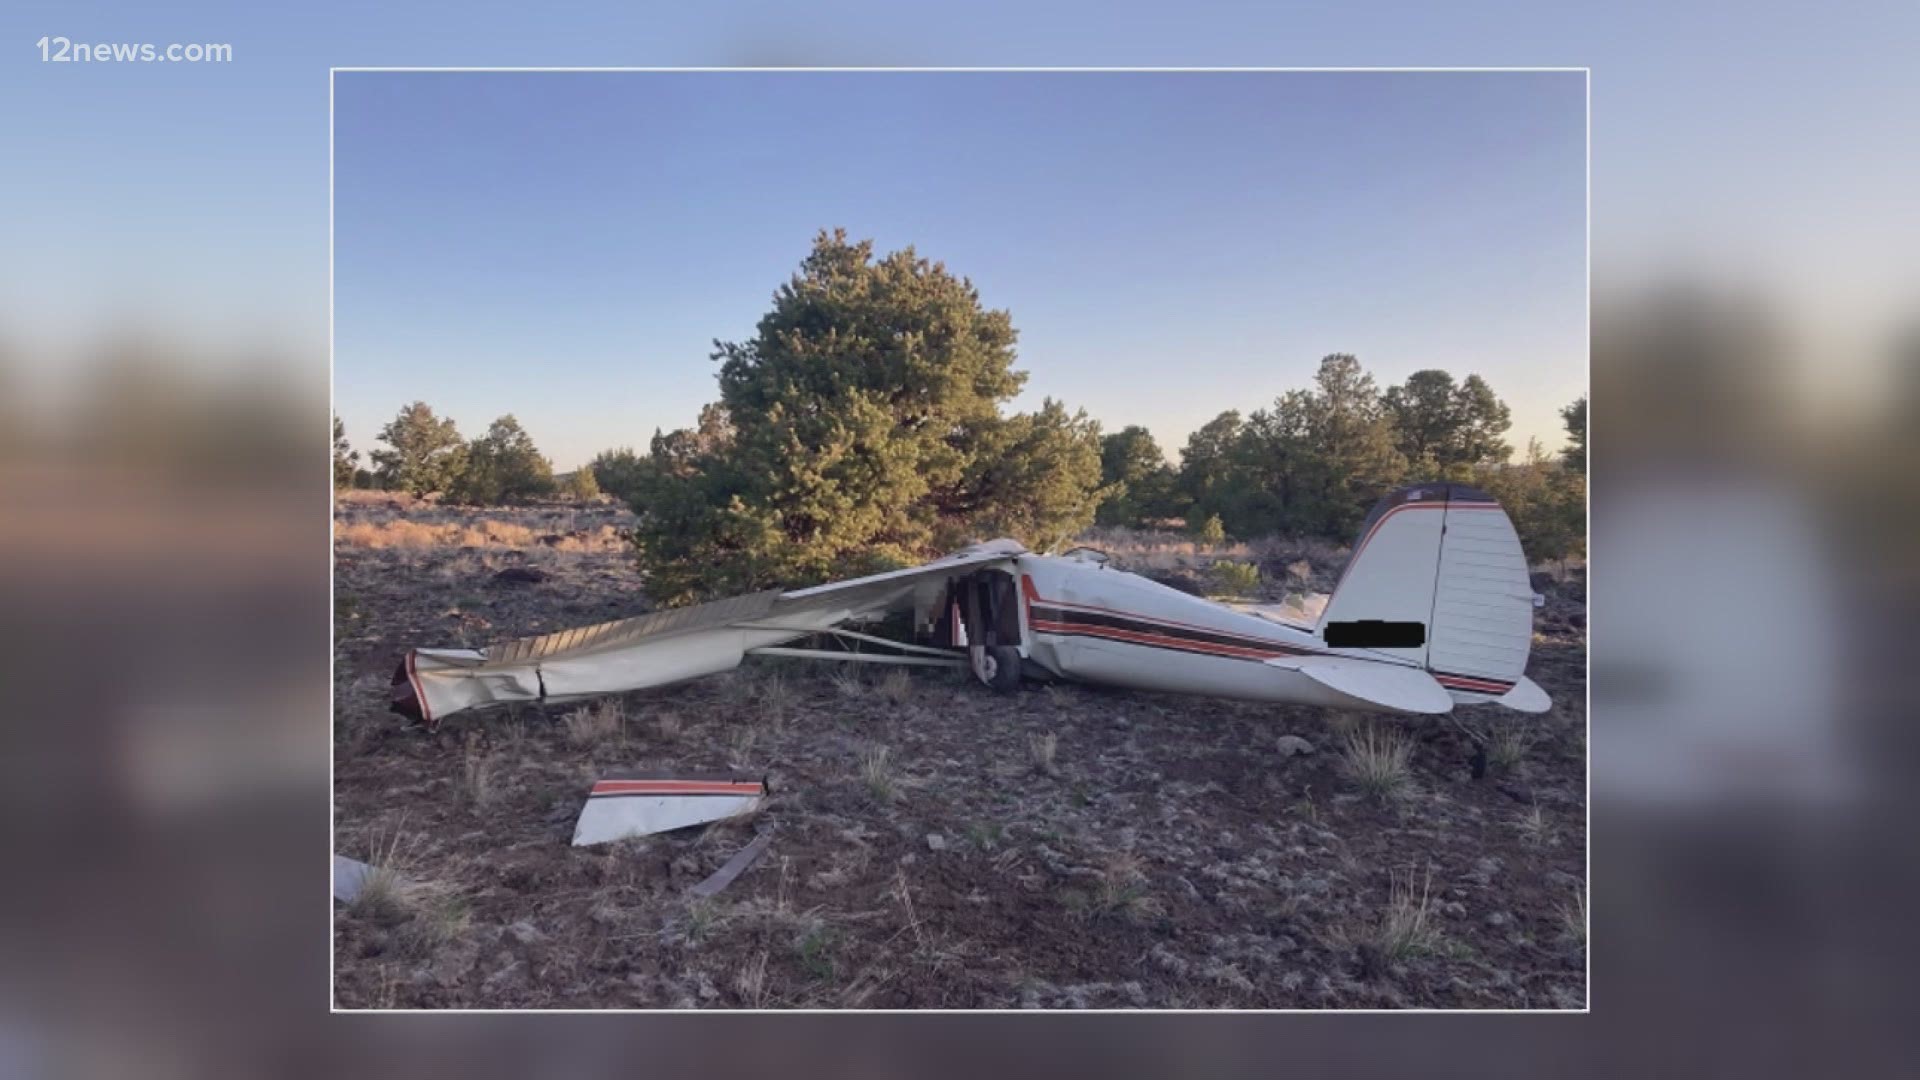 Two people are dead after a small plane crashed near the H. A. Clark Memorial Field airport in Williams, Arizona, according to the Coconino County Sheriff's Office.